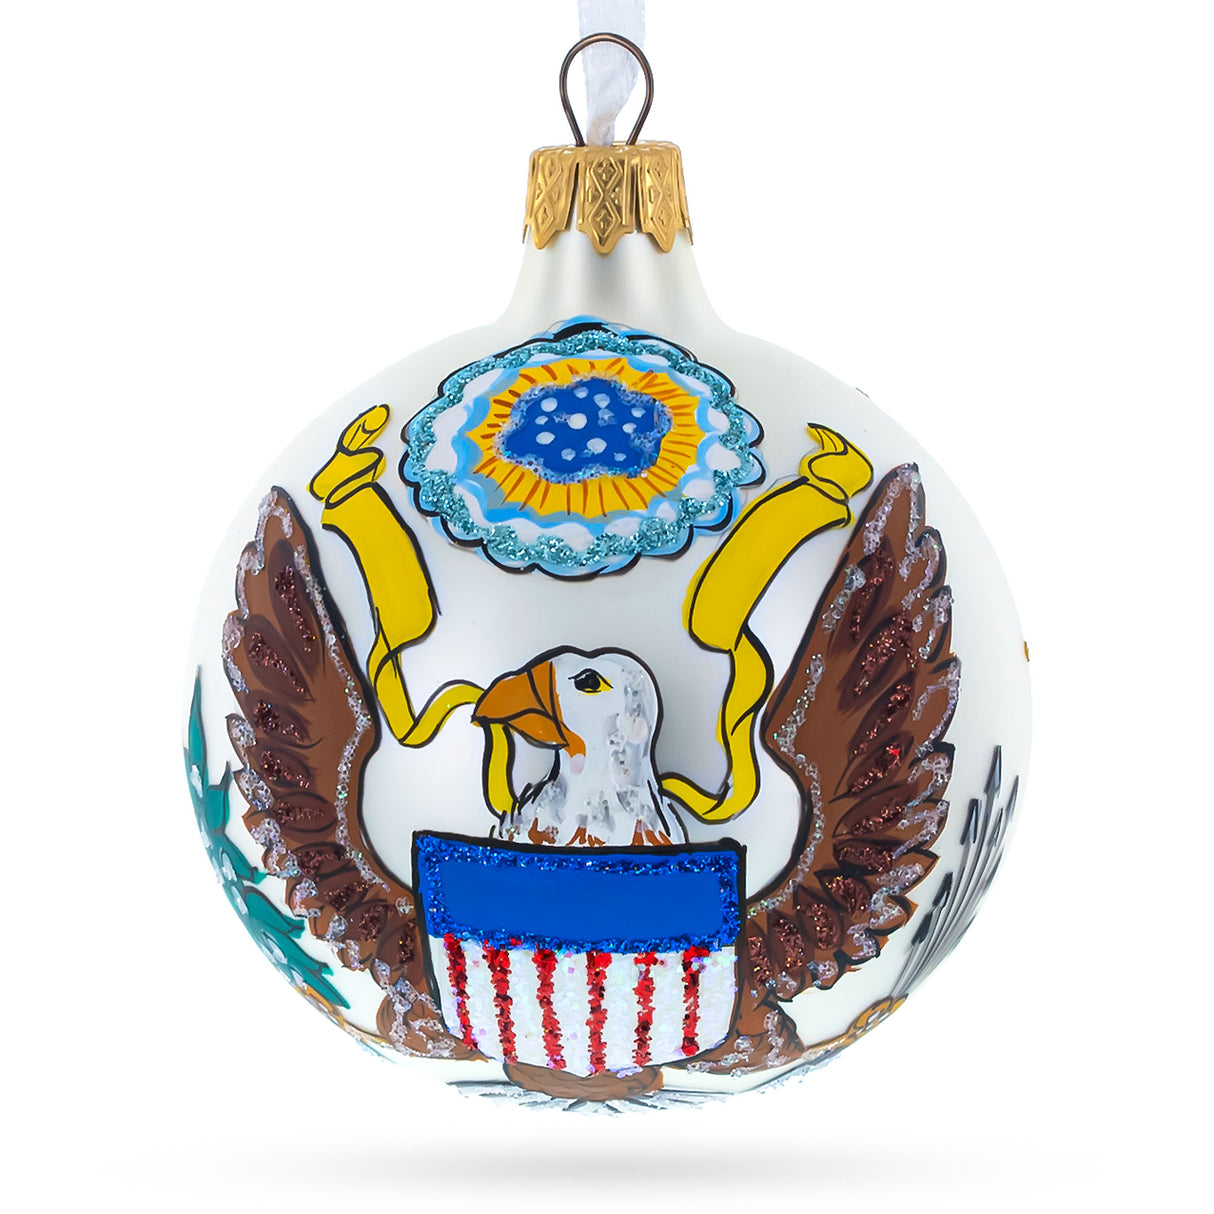 Patriotic Elegance: USA Coat of Arms Blown Glass Ball Christmas Ornament 3.25 Inches in Multi color, Round shape